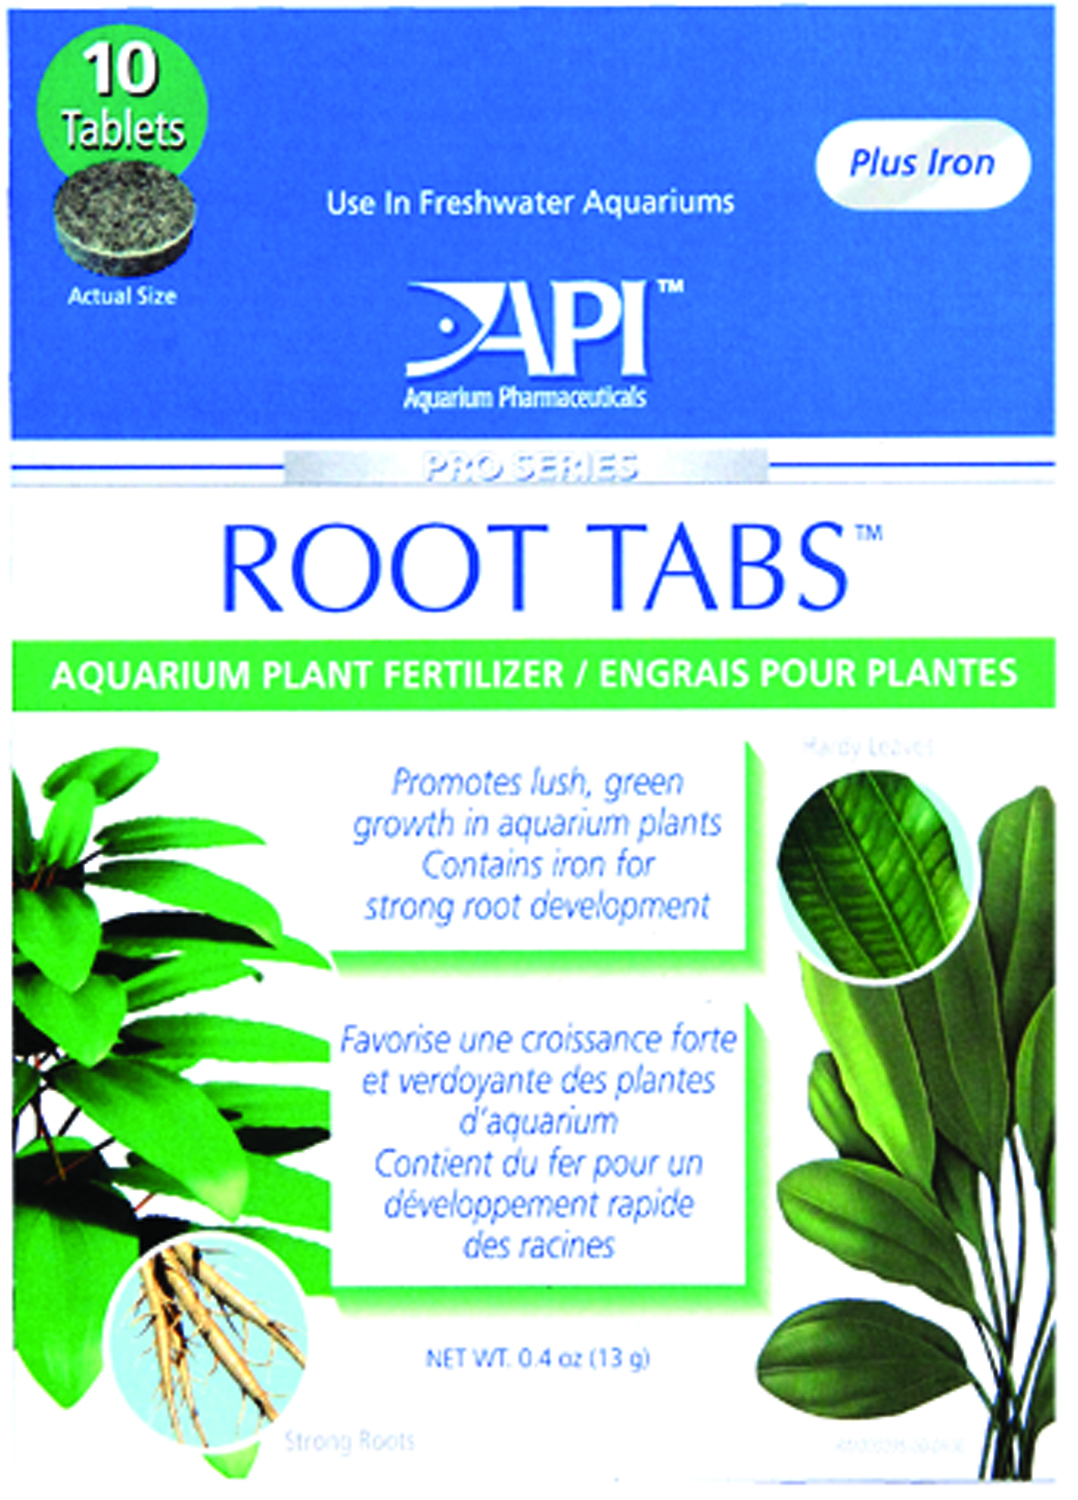 ROOT TABS